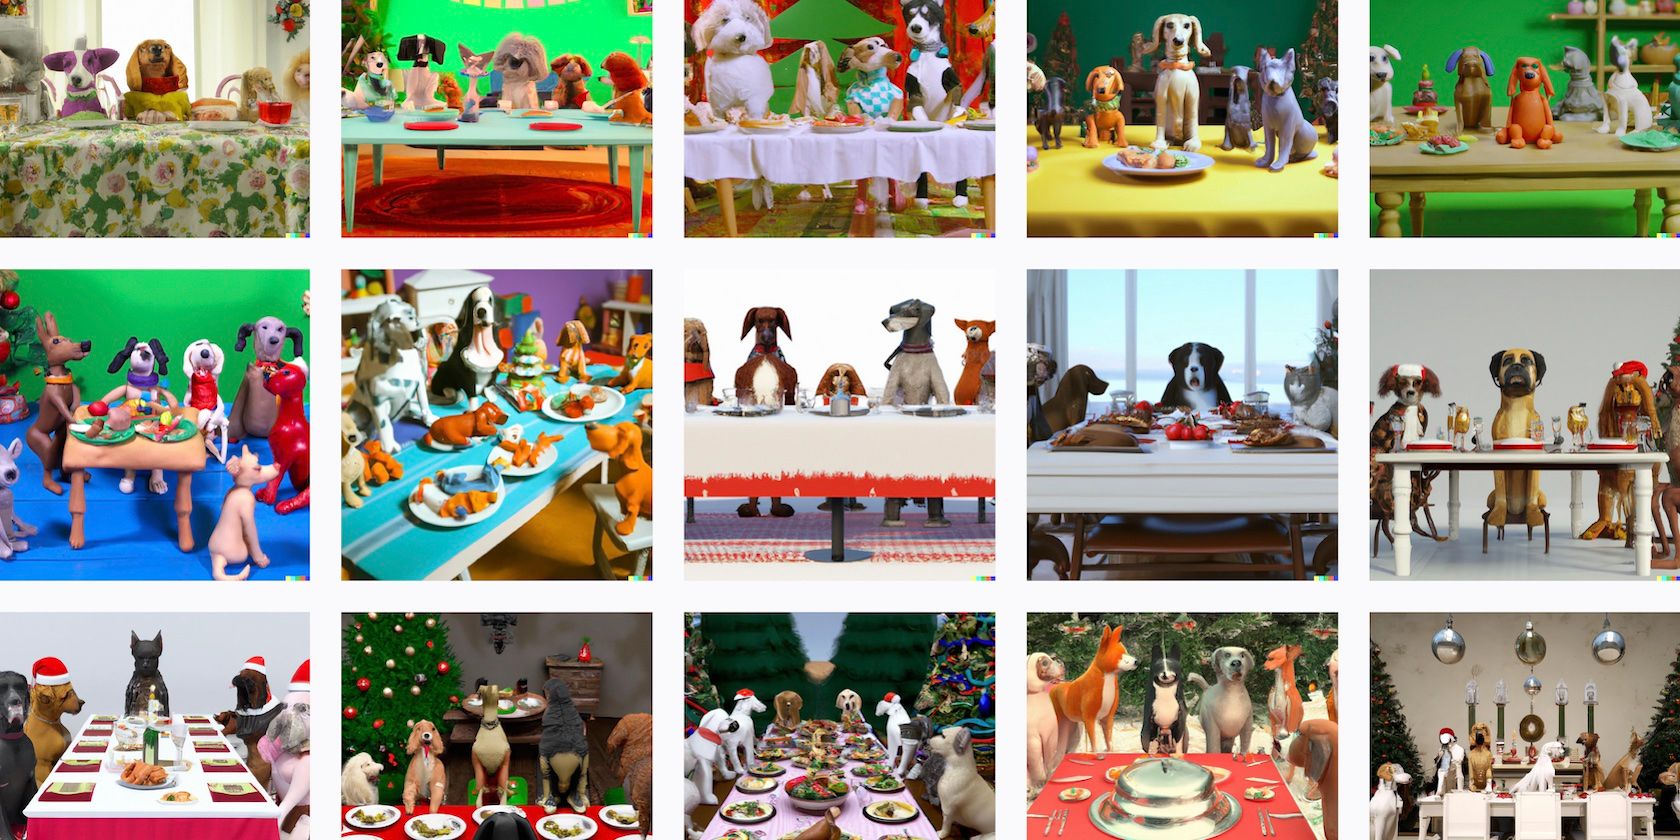 Different images of clay stop motion dogs at a Christmas feast, generated using Dall-E